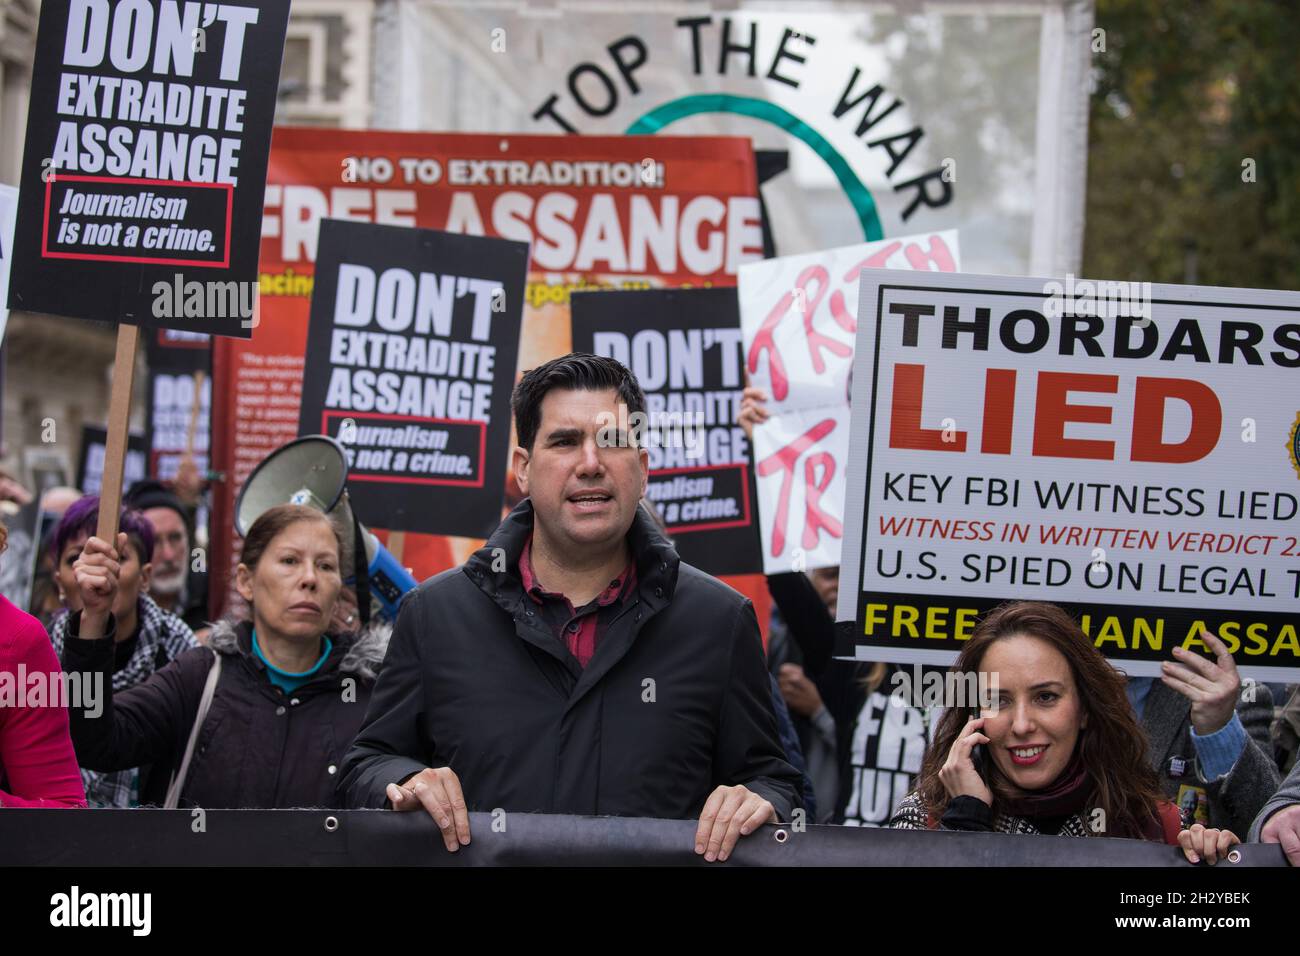 London, UK. 23rd October, 2021. Richard Burgon MP (c) and Stella Moris (r), fiancée of Wikileaks founder Julian Assange, take part in the March for Assange from BBC Broadcasting House to the Royal Courts of Justice organised by the Don't Extradite Assange campaign. The US government will begin a High Court appeal on 27th October against a decision earlier this year not to extradite Assange to face espionage charges in the United States. Assange has been held in Belmarsh Prison since 2019. Credit: Mark Kerrison/Alamy Live News Stock Photo